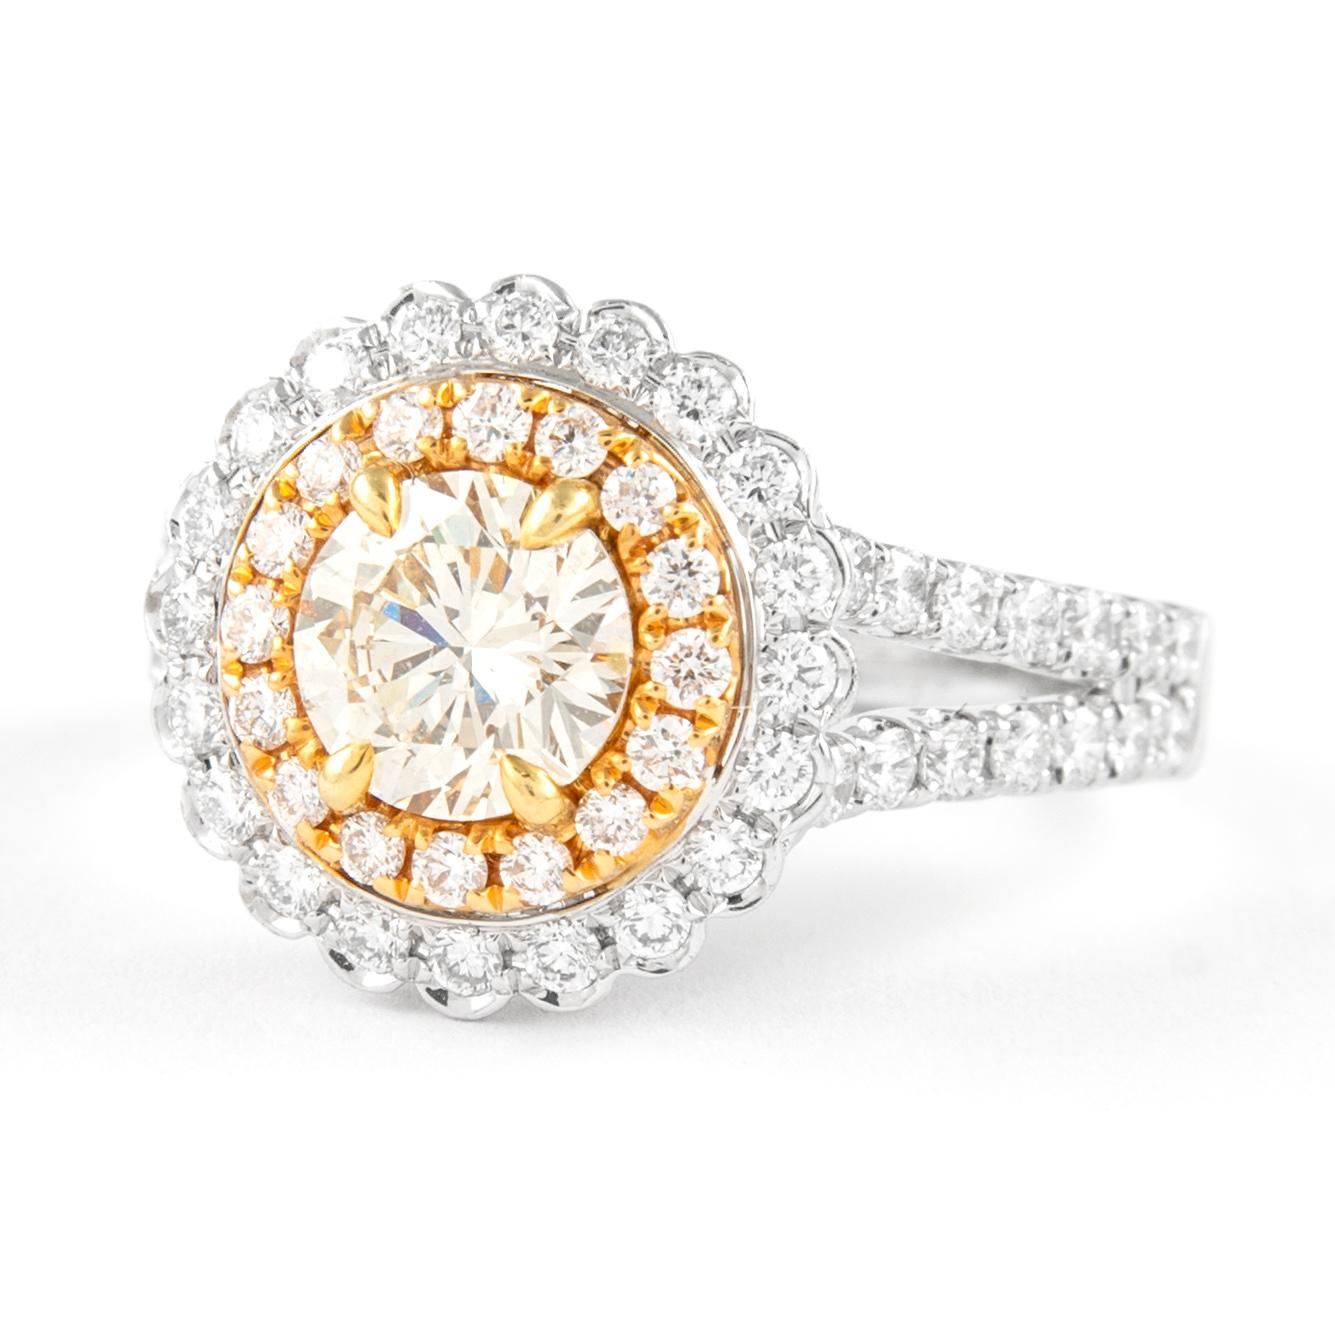 Stunning modern EGL certified yellow diamond double halo ring, two-tone 18k yellow and white gold, split shank. By Alexander Beverly Hills.
1.78 carats total diamond weight.
0.96 carat round brilliant Light Yellow color and SI2 clarity diamond, EGL